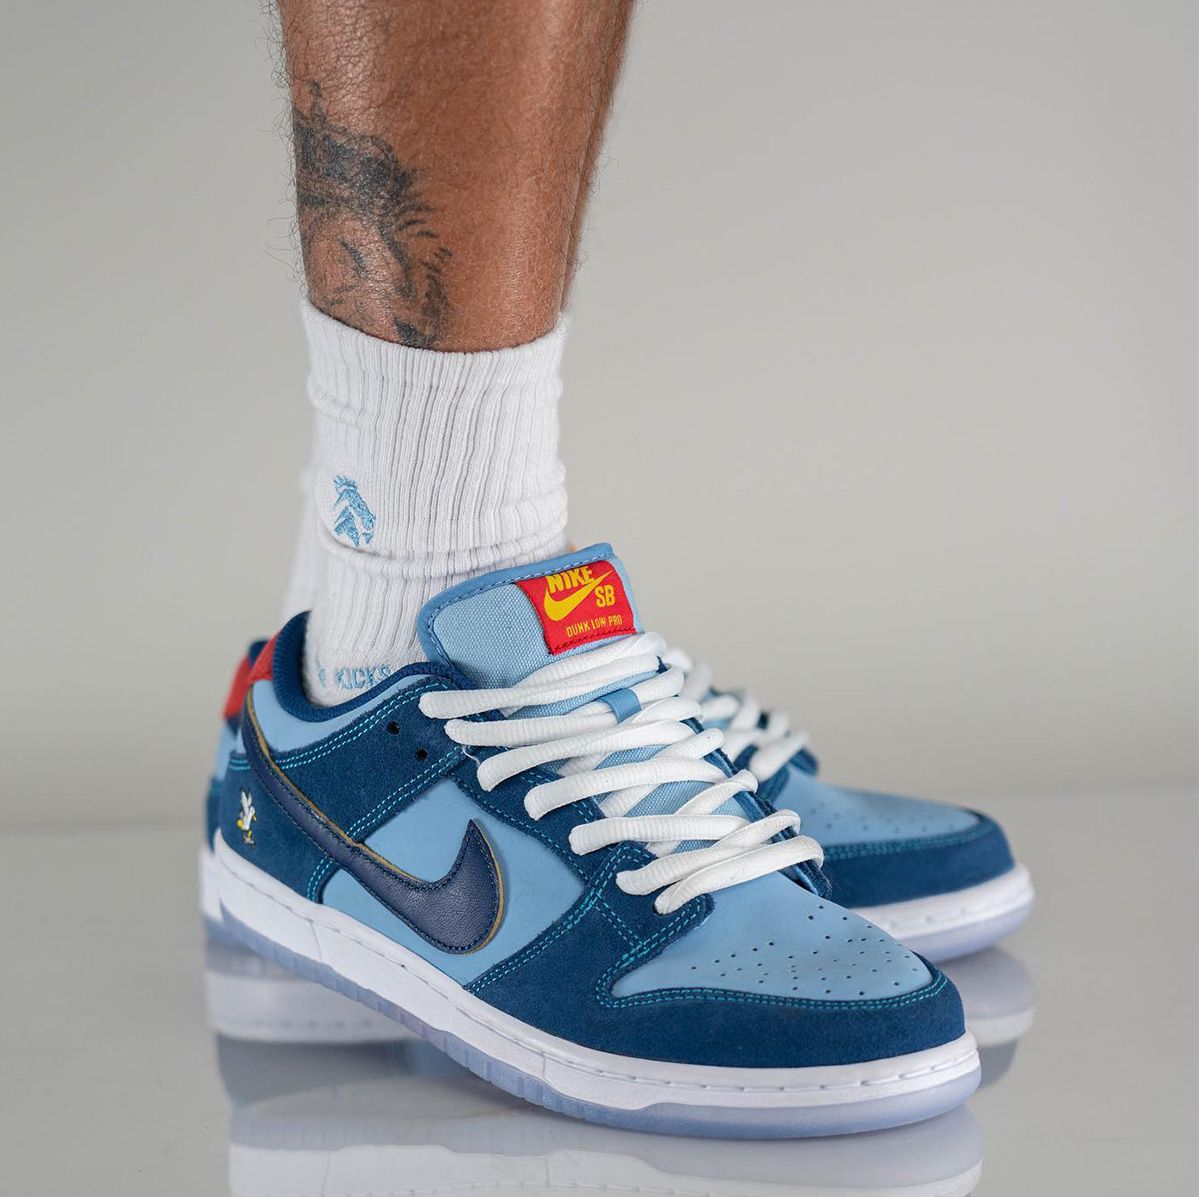 Where to Buy the Why So Sad? x Nike SB Dunk Low | House of Heat°